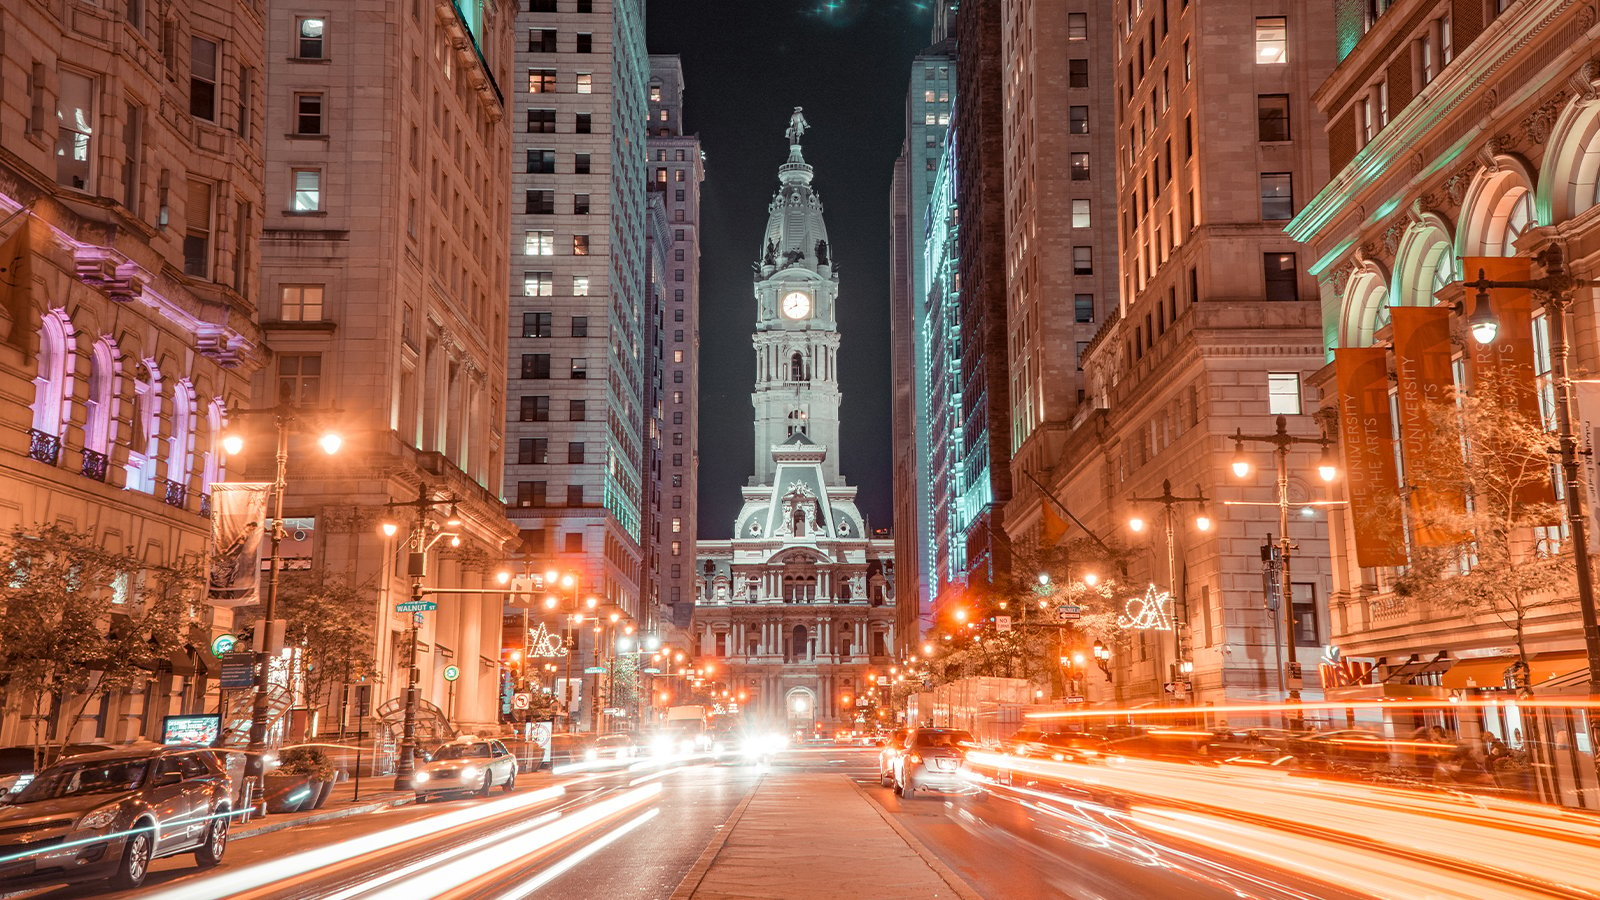 A time lapsed image of Philadelphia with cars passing in front of City Hall.